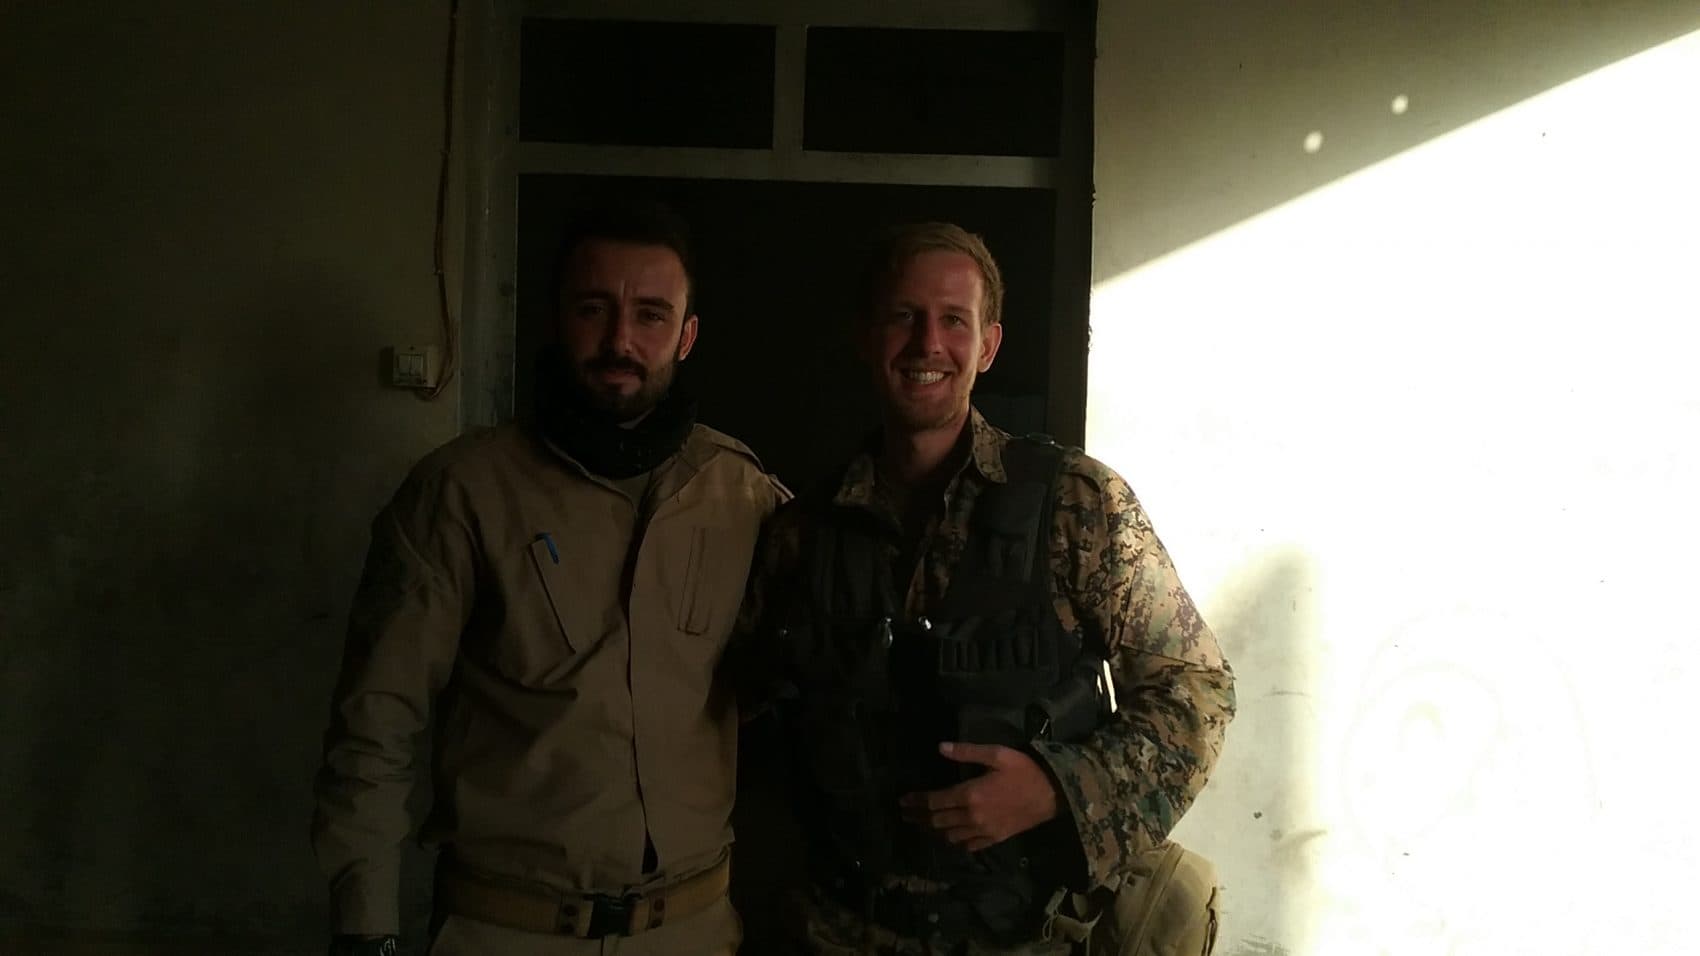 Caleb Stevens (right) in Raqqa with Mehmed, a Kurdish friend who was also fighting there. The picture was taken just after the ISIS forces in the city surrendered. (Courtesy Caleb Stevens)